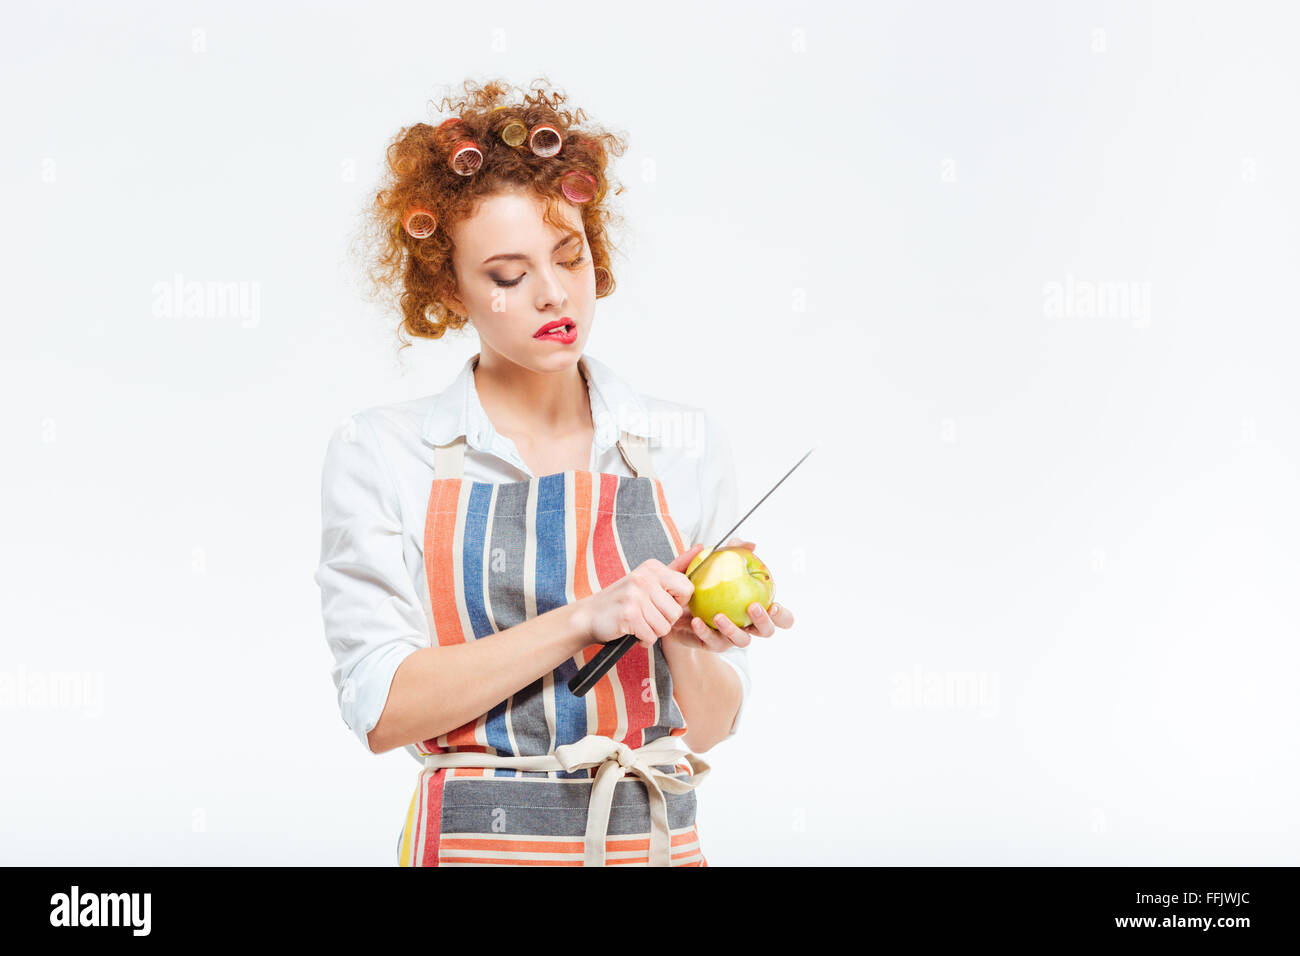 Housewife cutting apple isolated on a white background Stock Photo